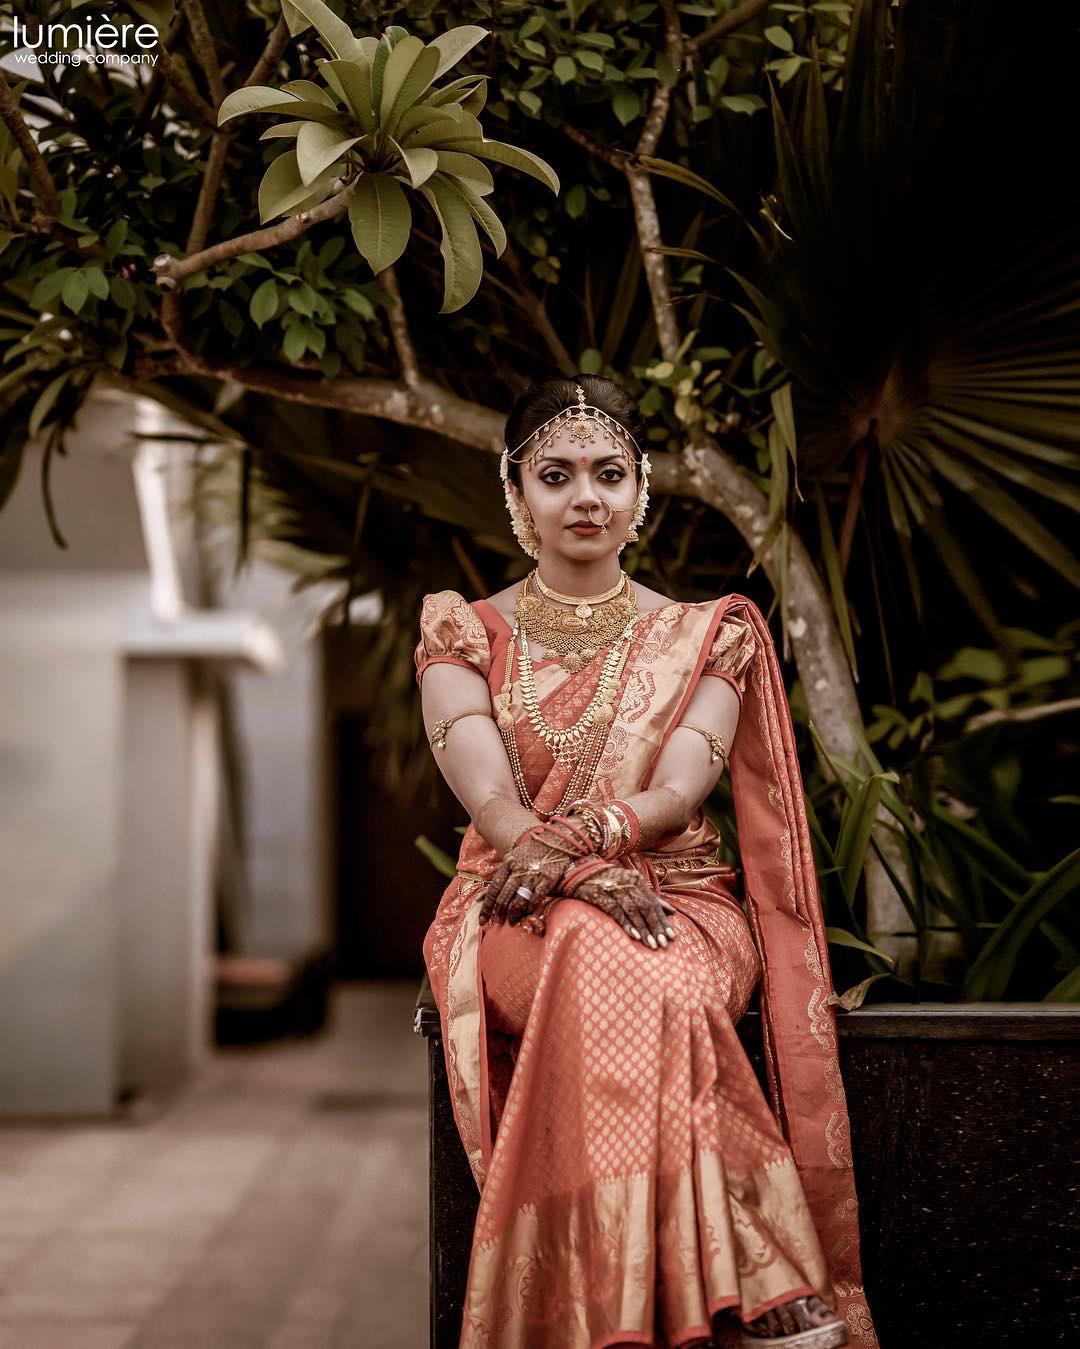 Bridal Photography Capturing The Different Brides Of India